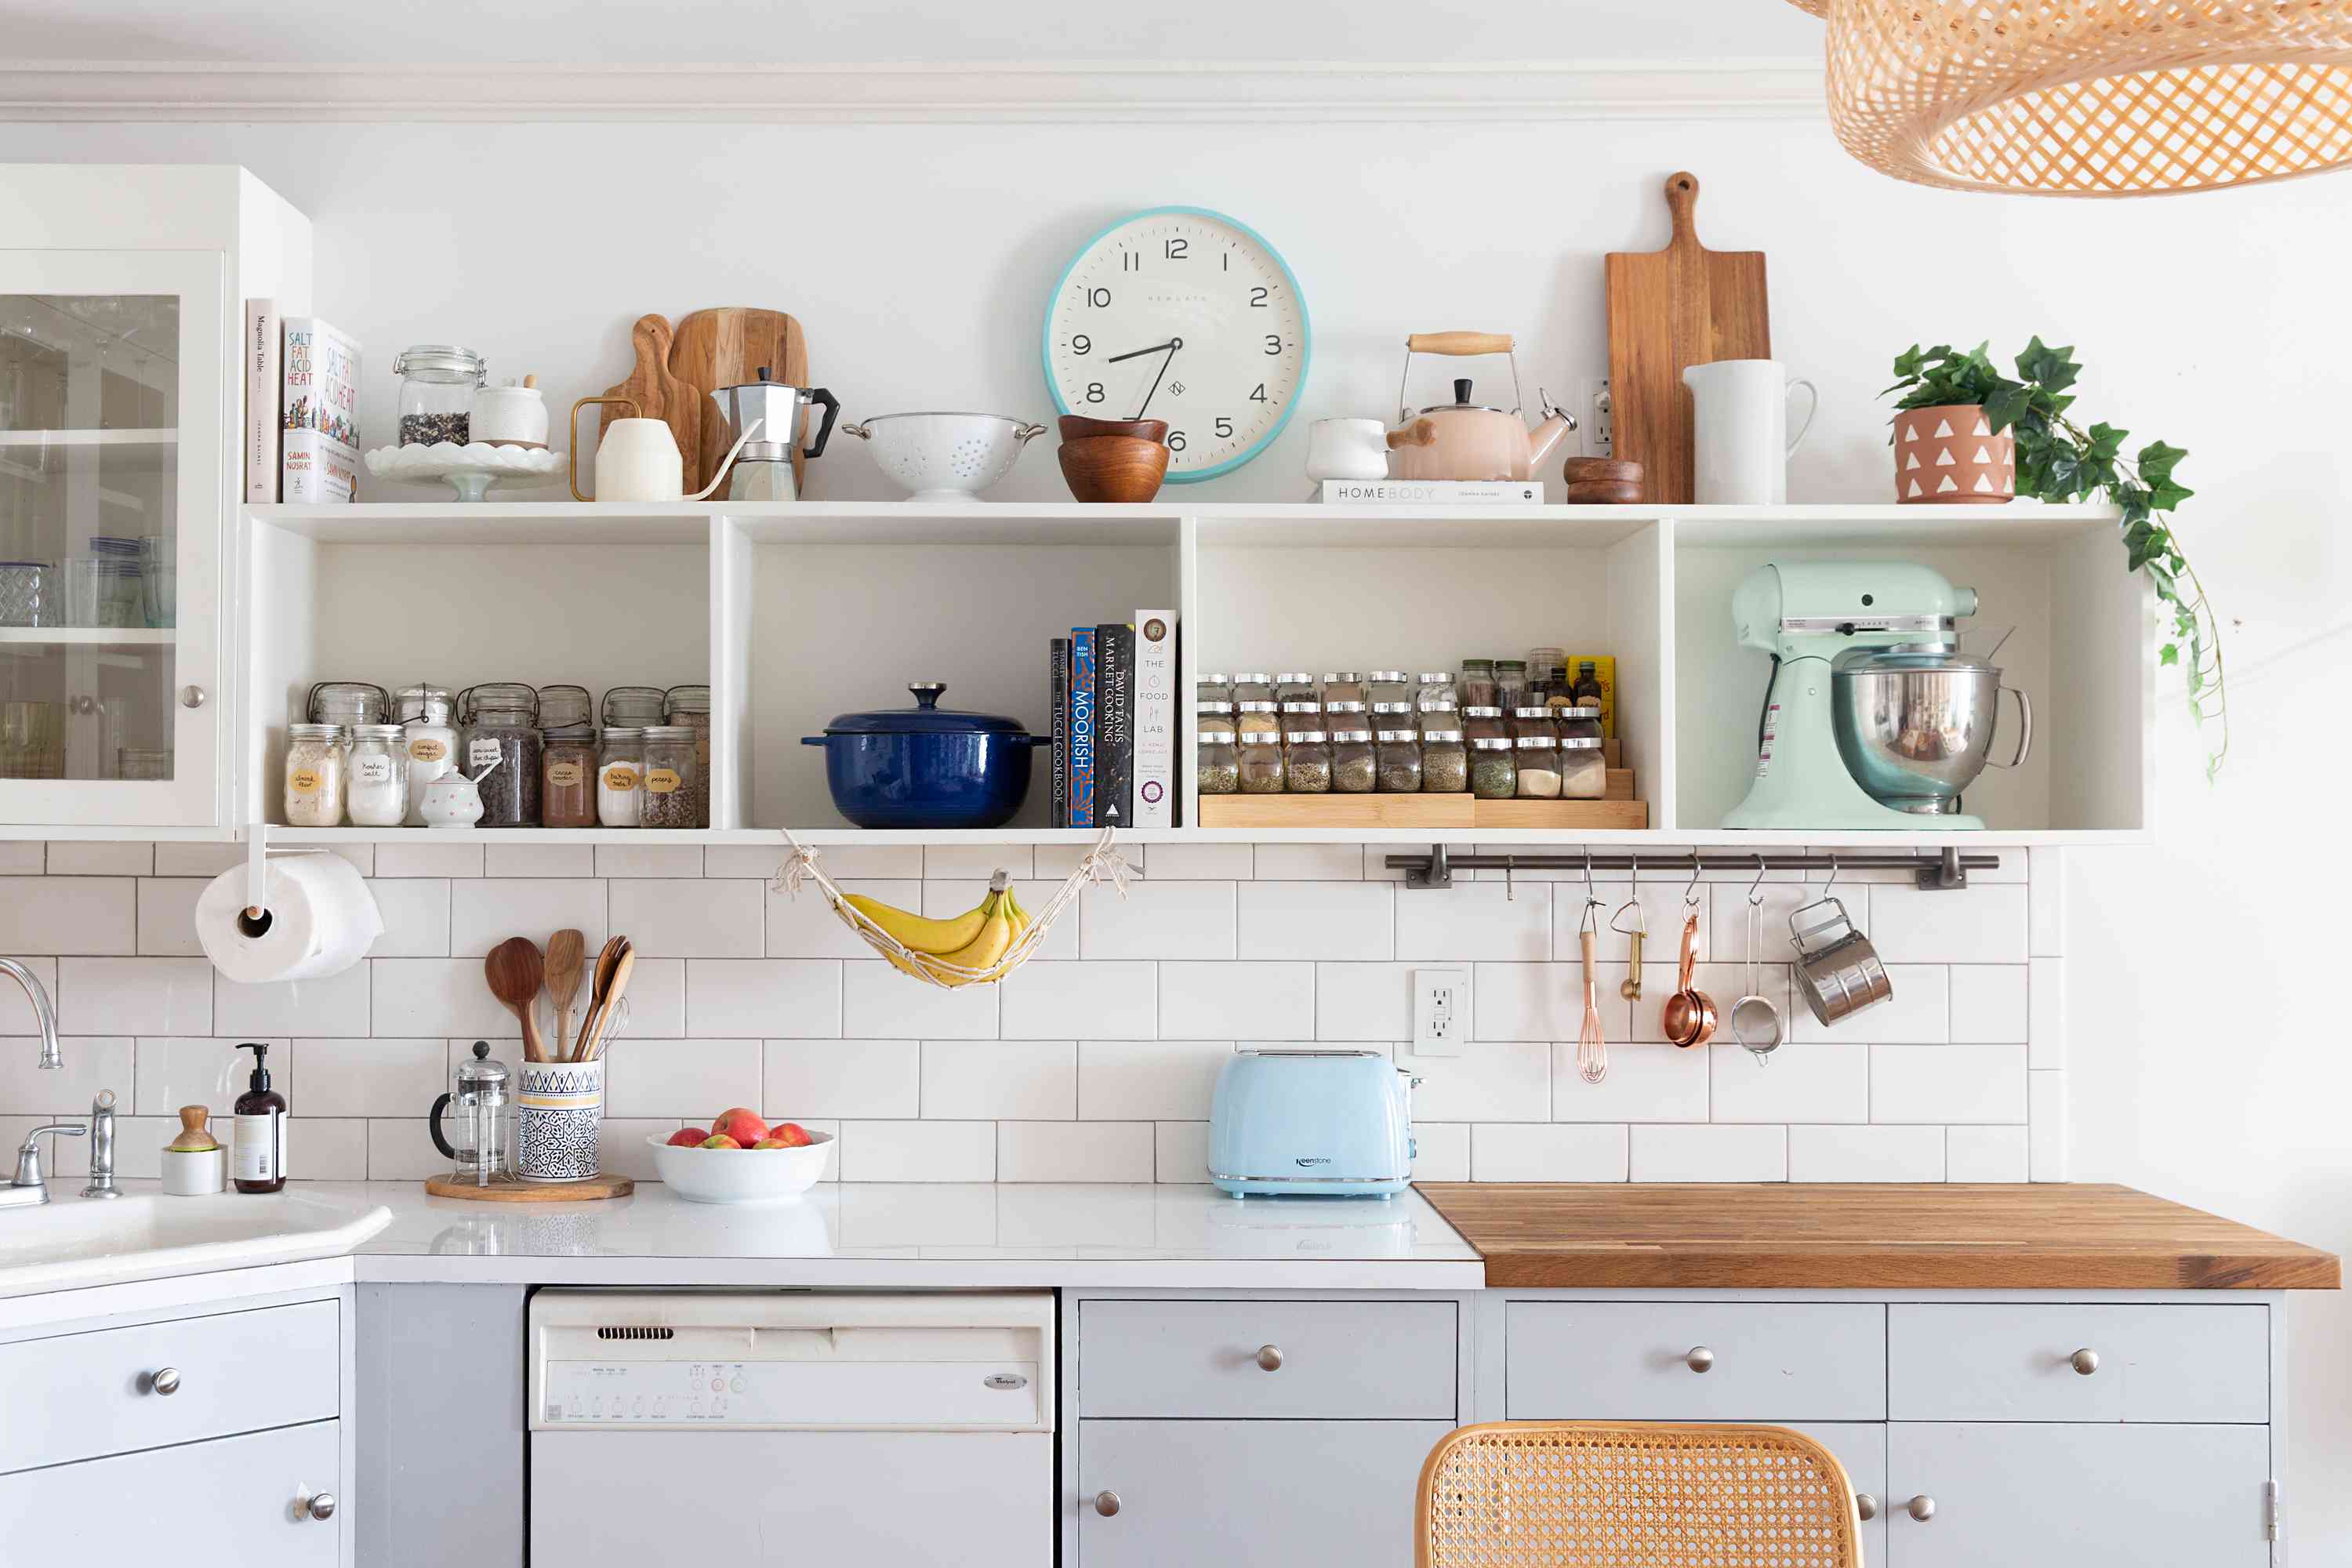 8 Kitchen Storage Trends You Should Avoid If You Want Your Space To Be At It’s Most Functional